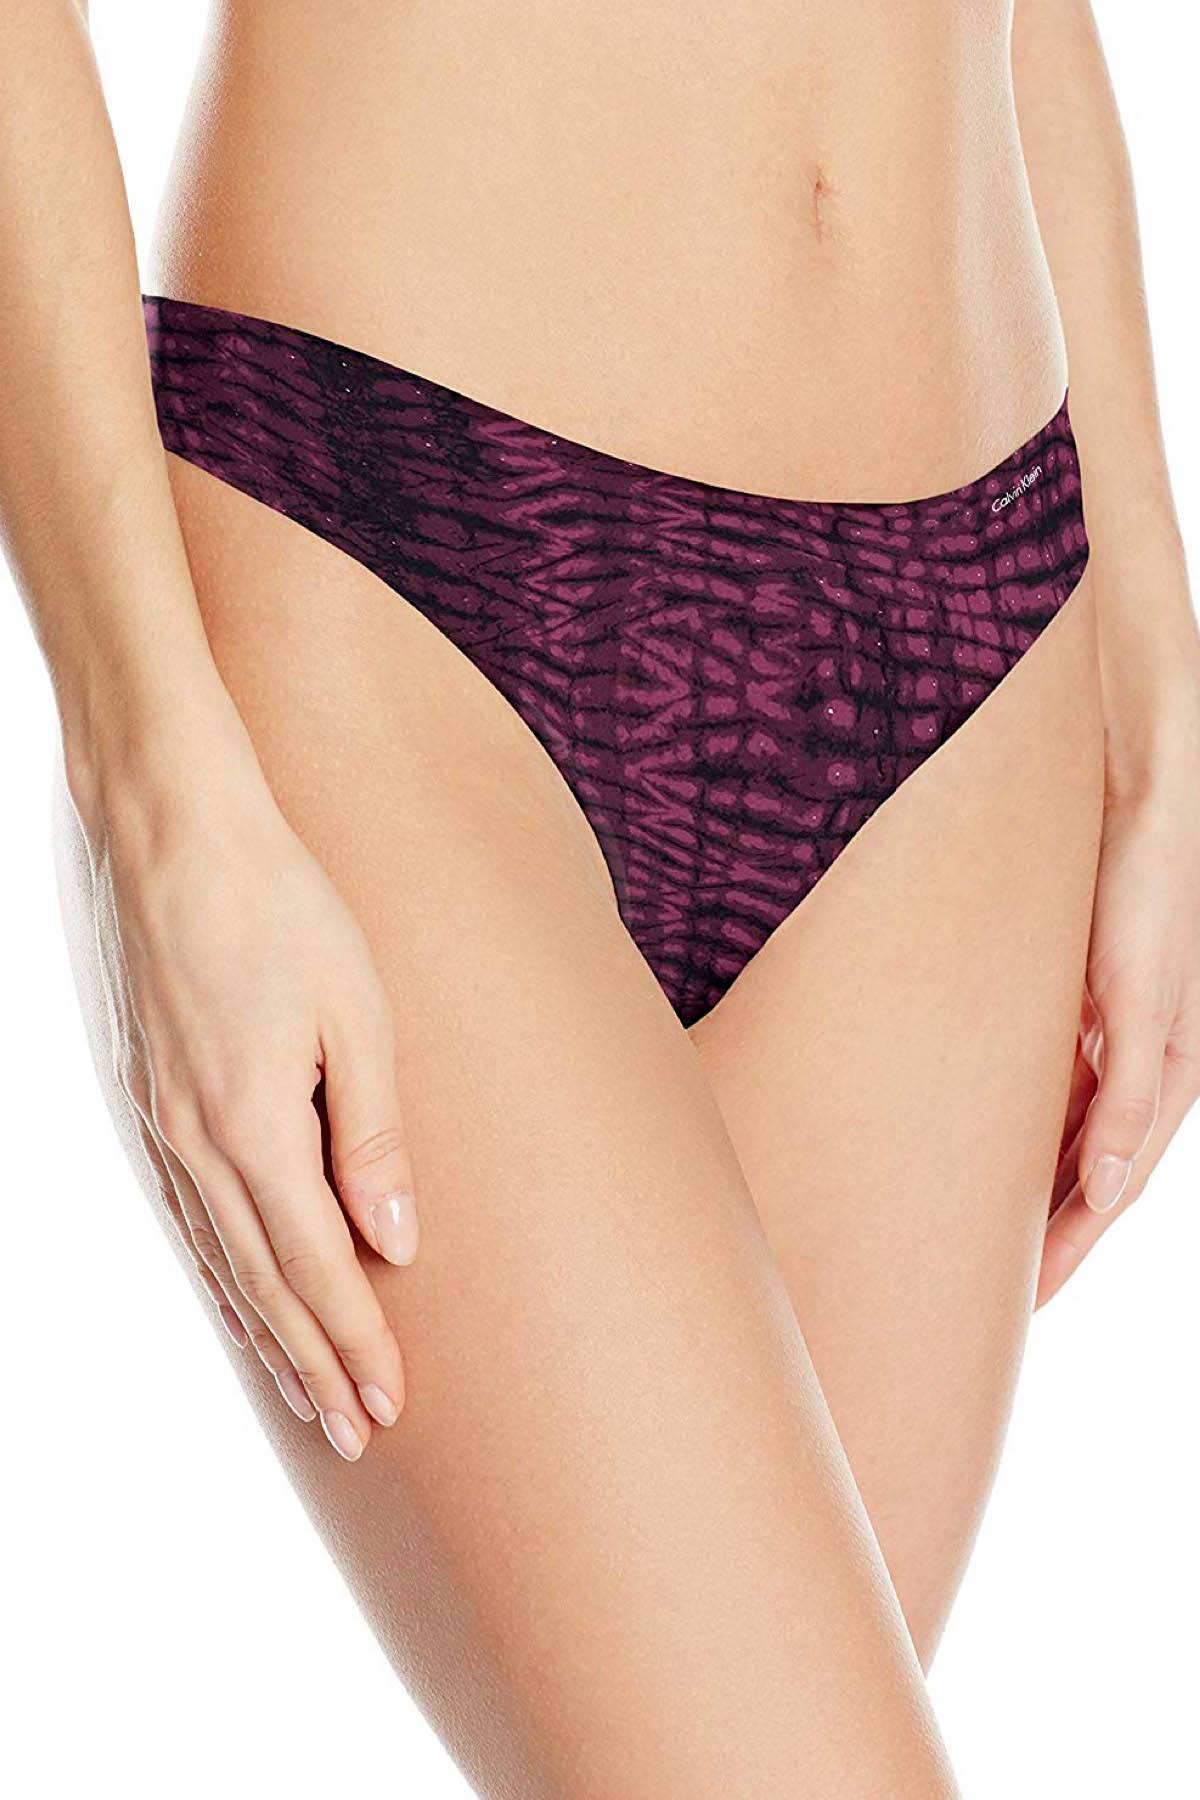 Calvin Klein Mysterious-Skin Invisibles Thong